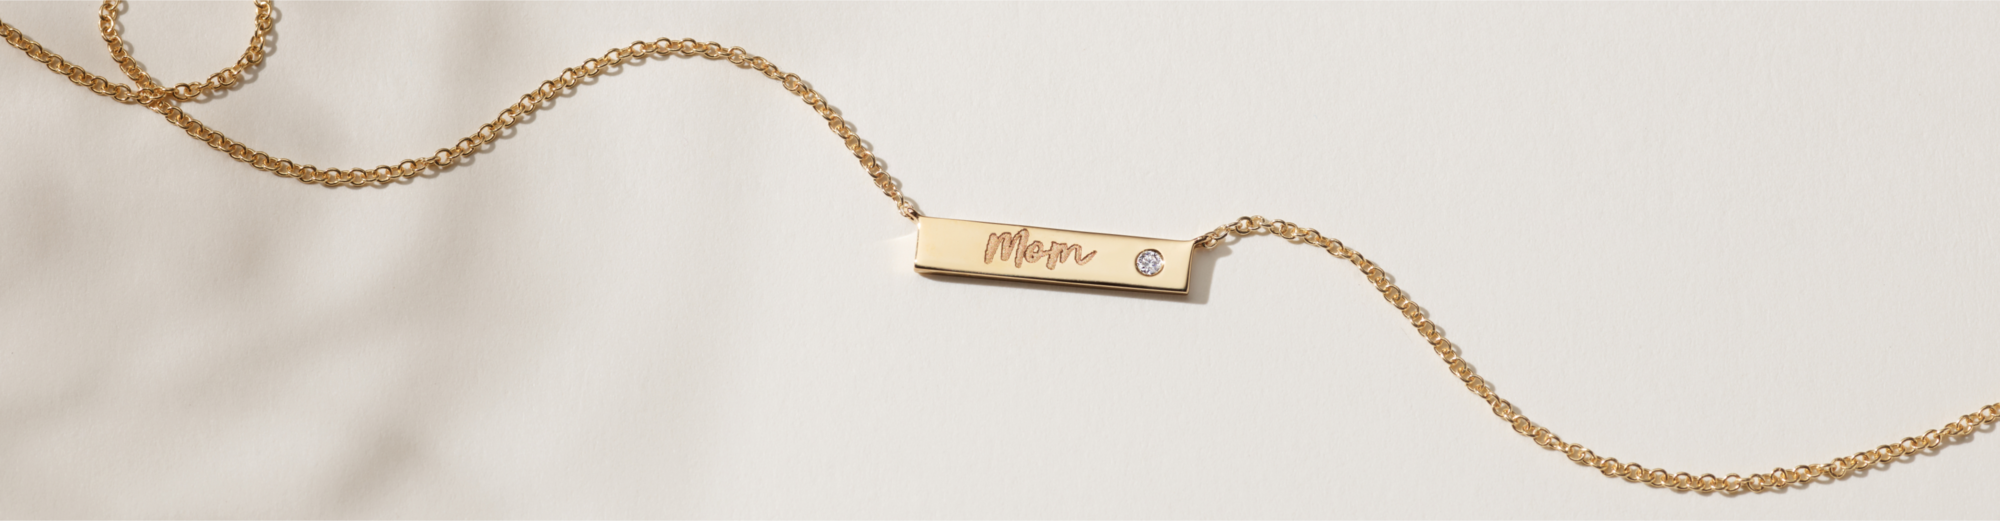 An engraved bar necklace with a single diamond